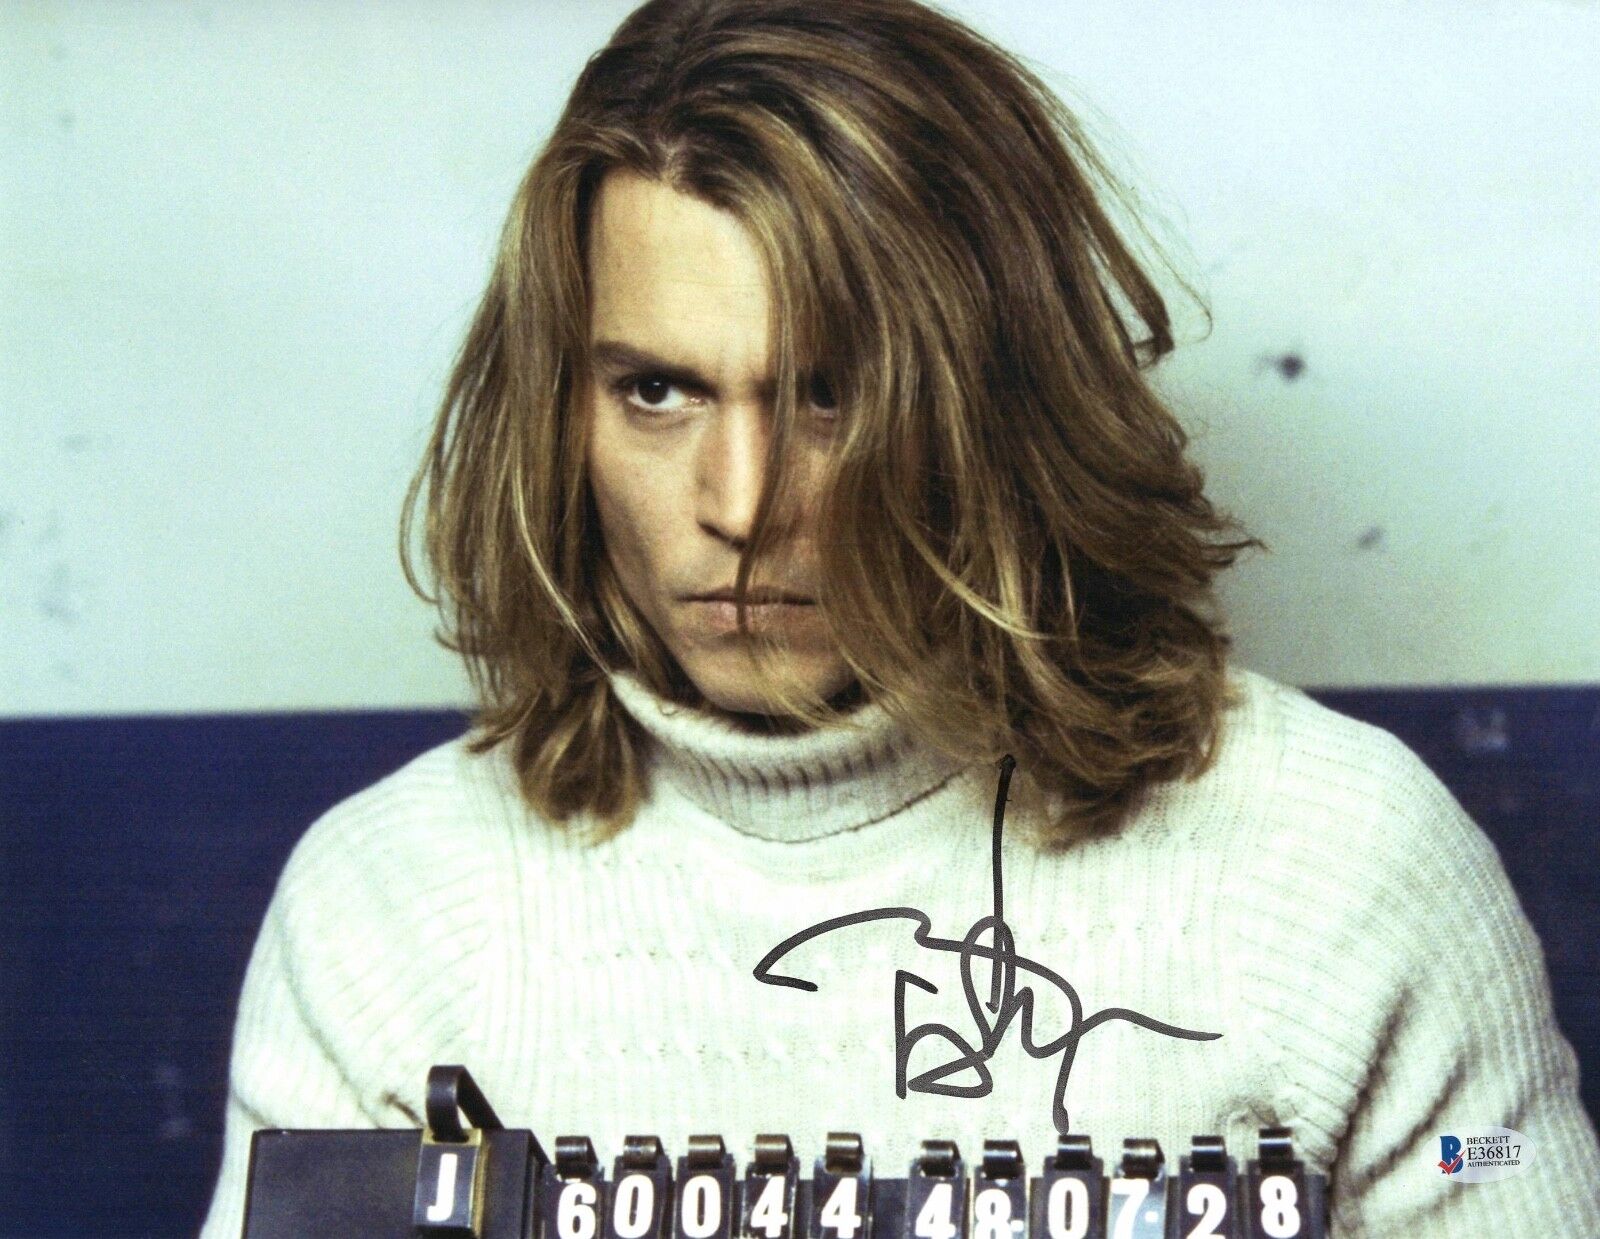 JOHNNY DEPP SIGNED BLOW 'GEORGE JUNG' 11X14 PHOTO AUTHENTIC AUTOGRAPH BECKETT